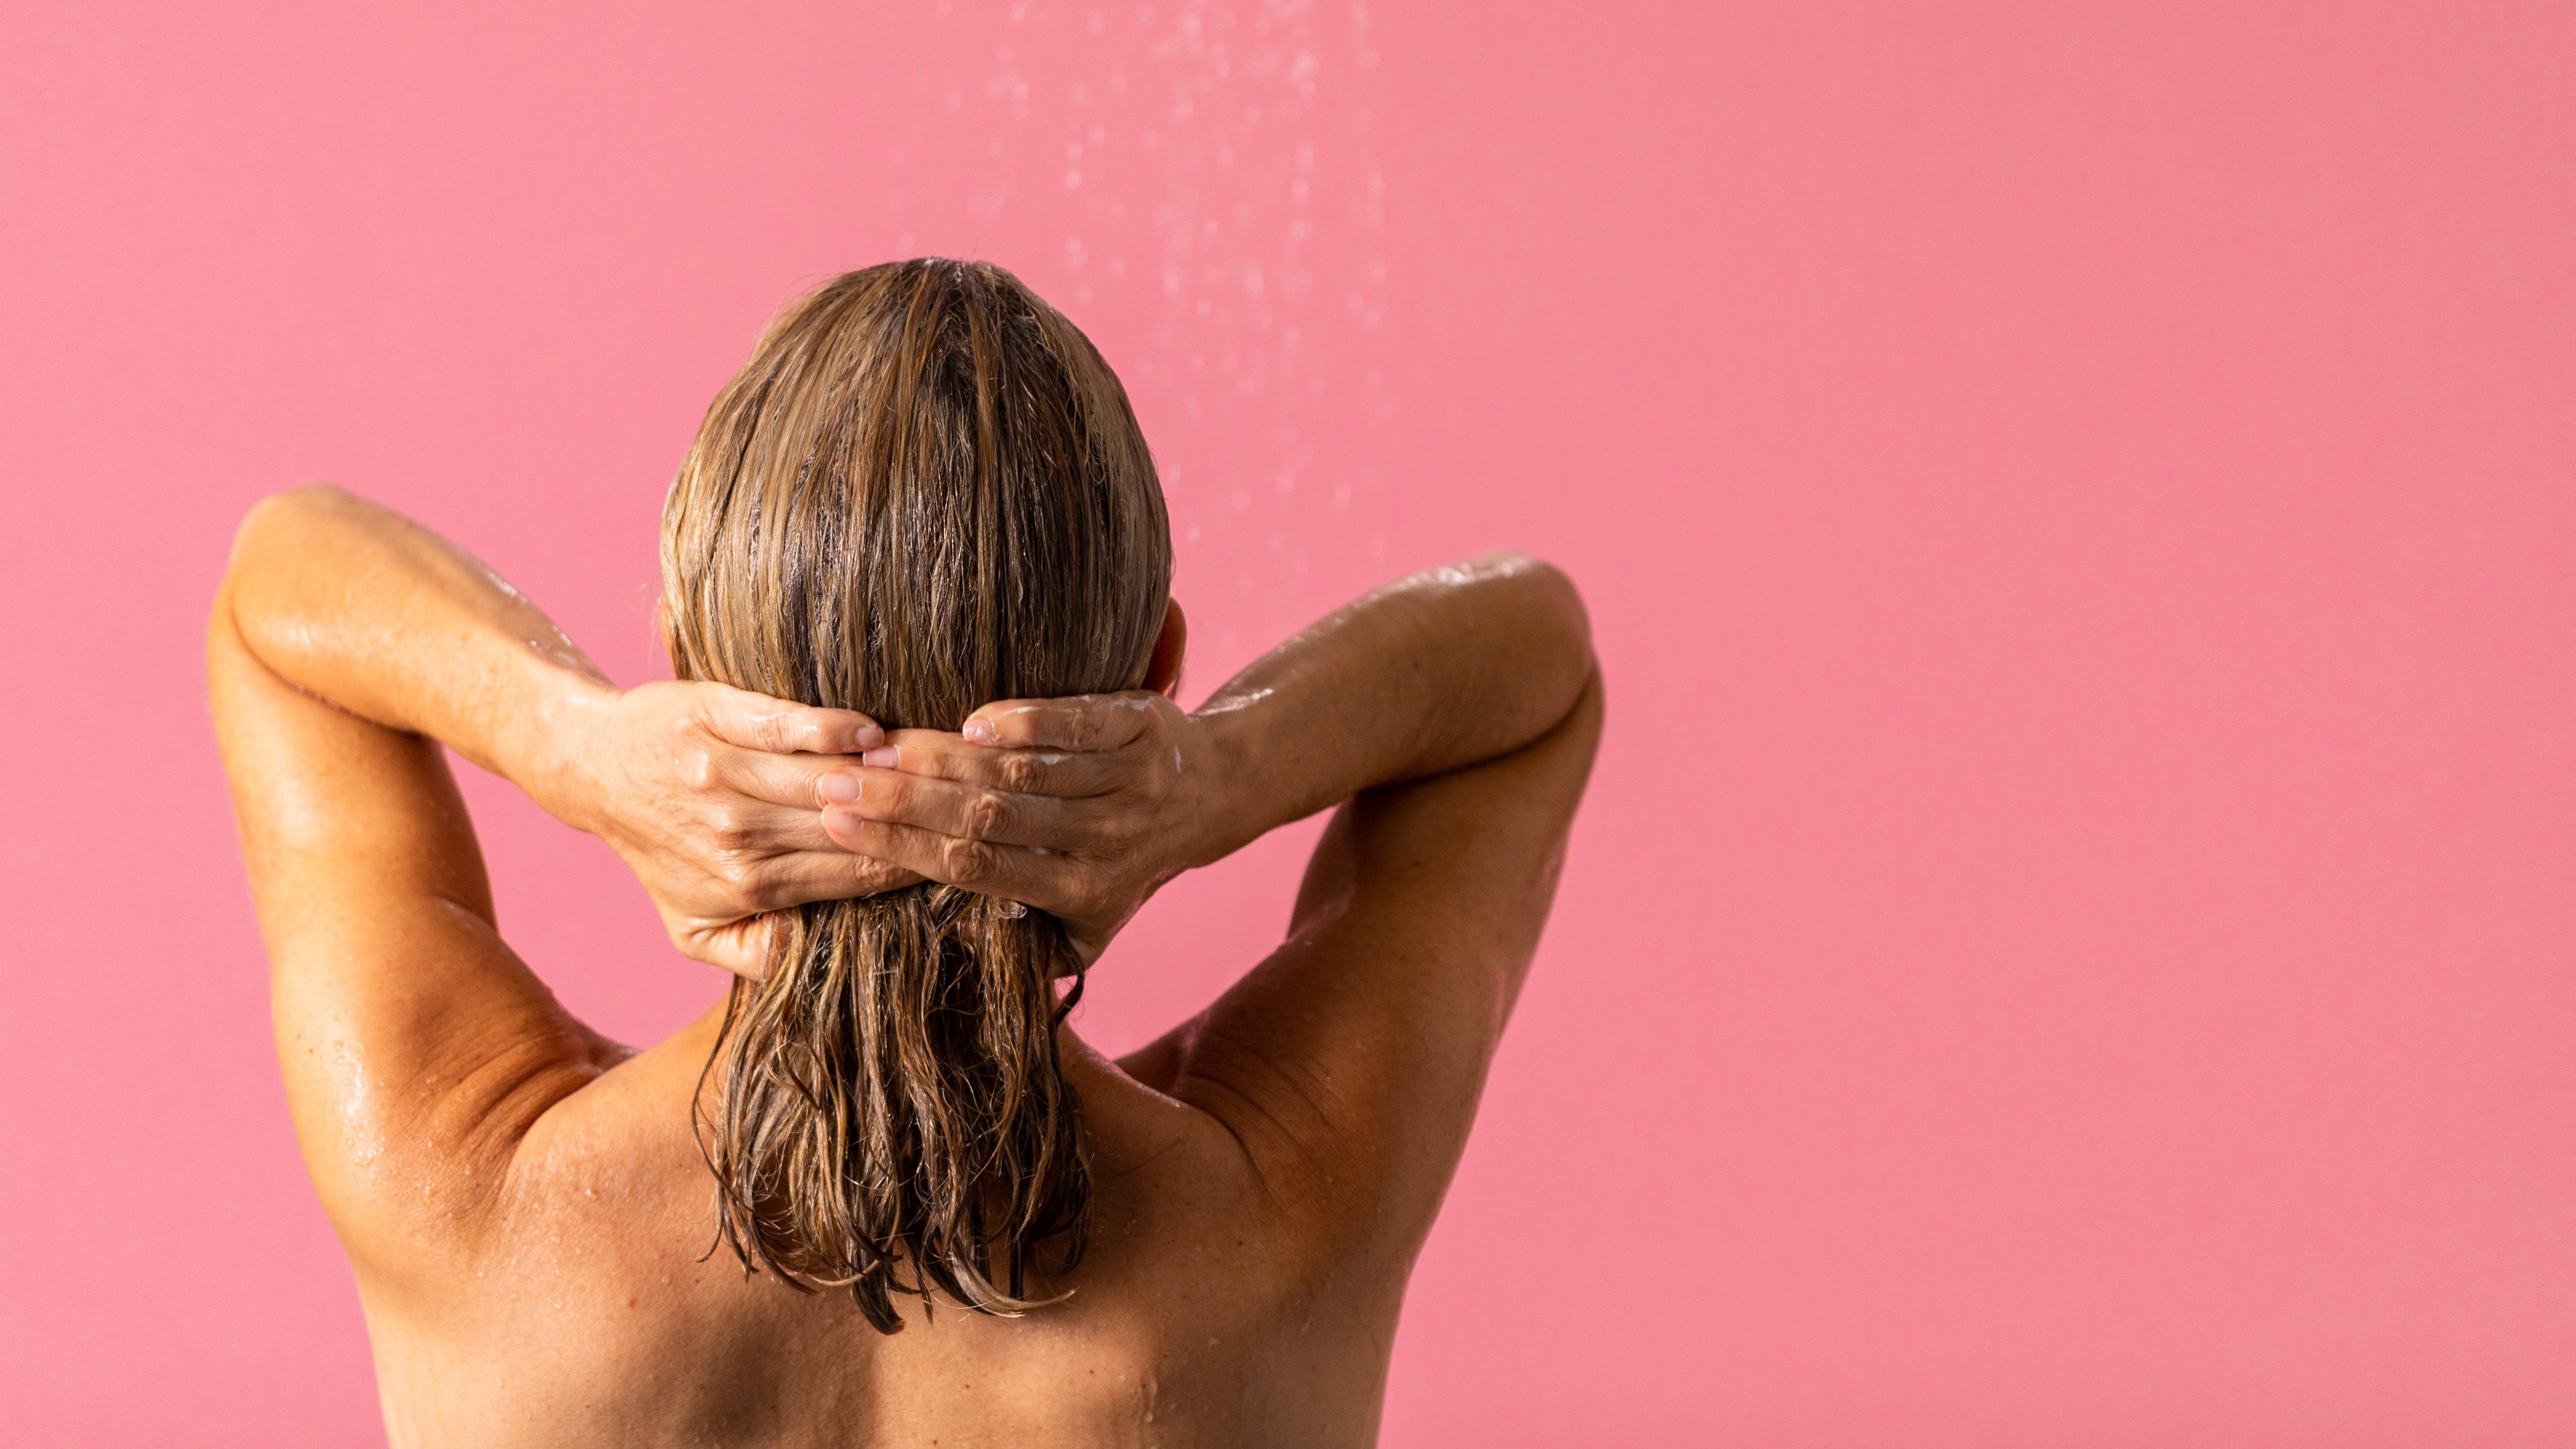 Model stands in a running shower facing away running their hands down the length of their hair on a salmon pink background.